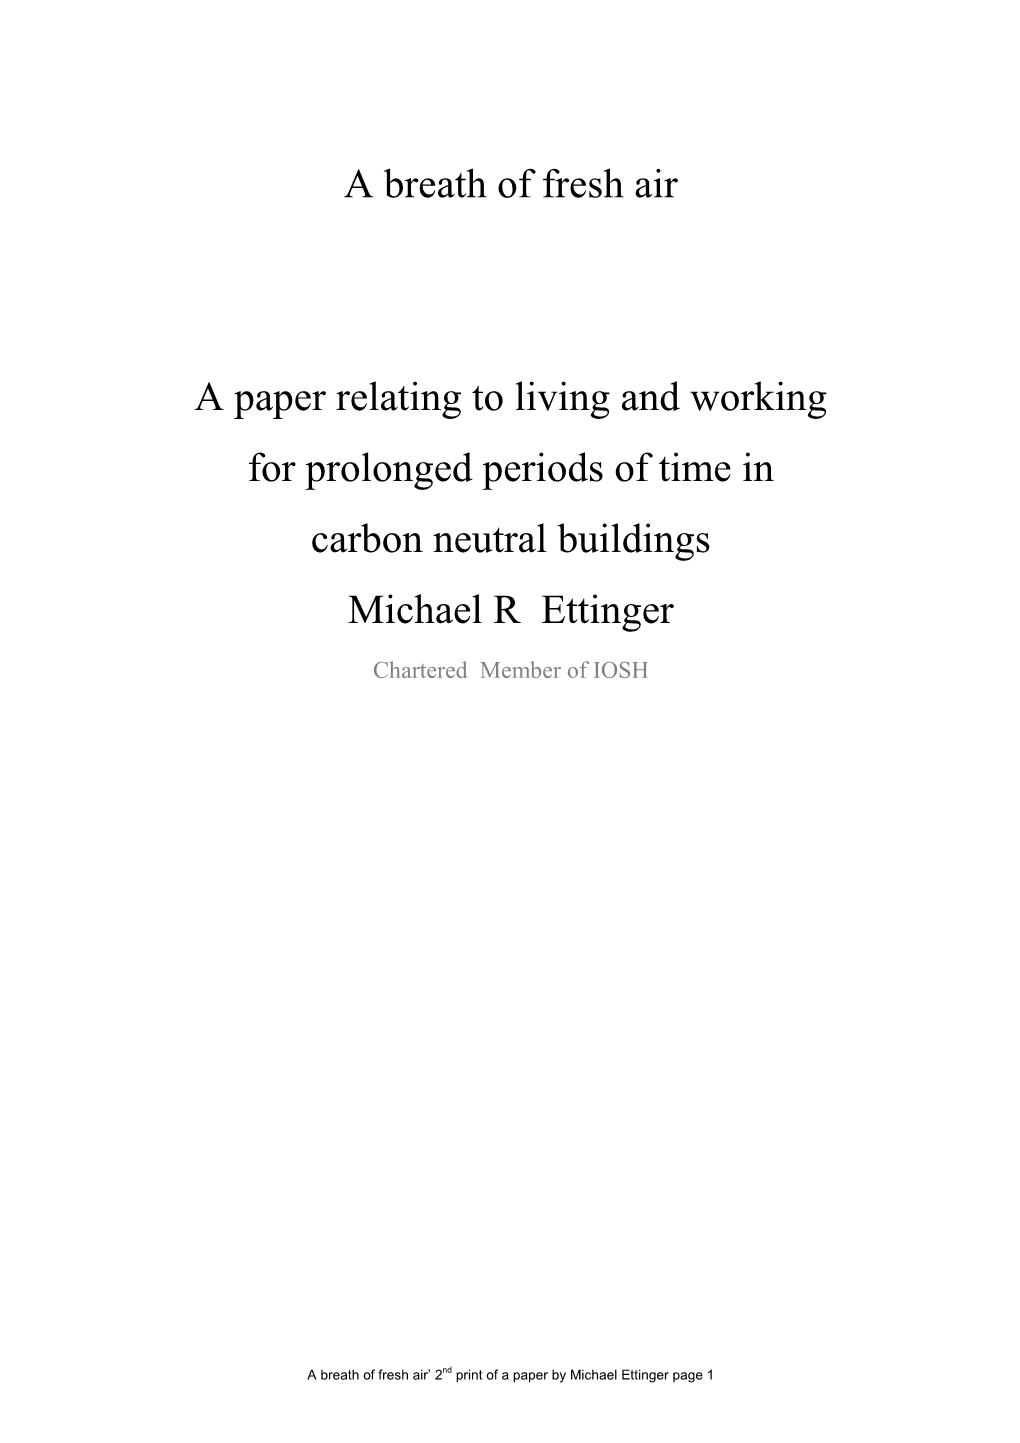 A Breath of Fresh Air a Paper Relating to Living and Working for Prolonged Periods of Time in Carbon Neutral Buildings Michael